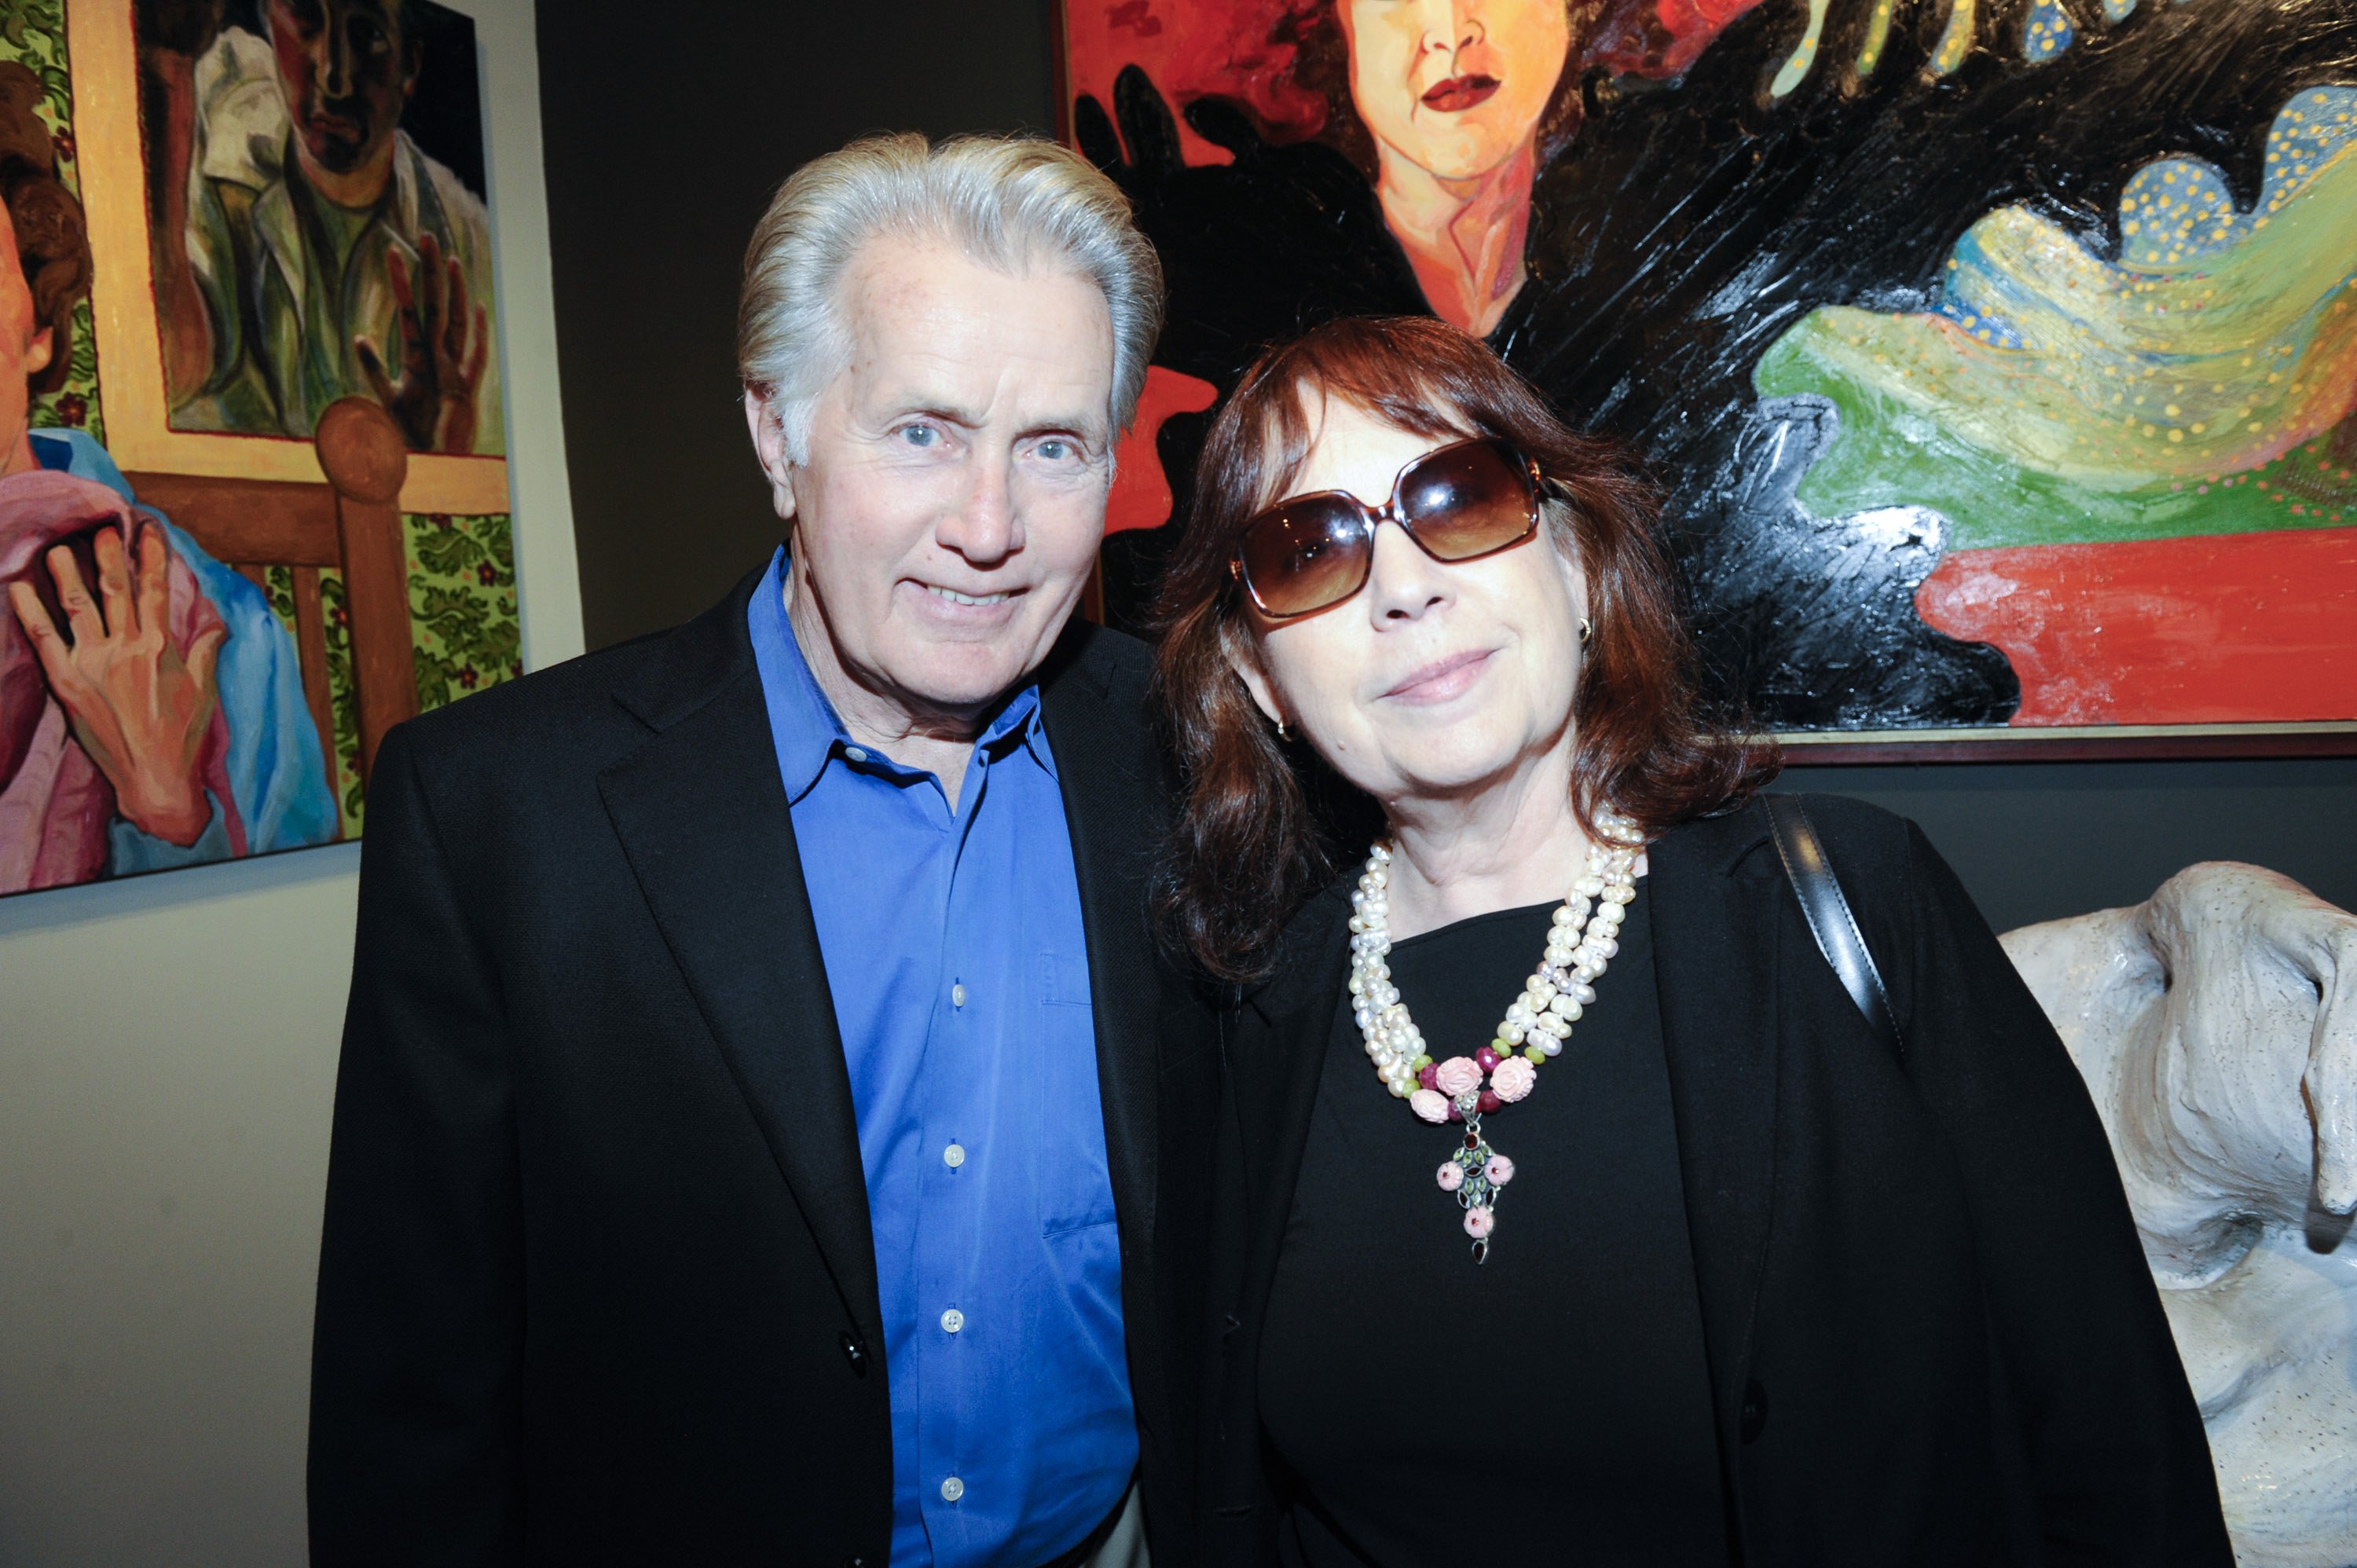 Martin Sheen and Janet Sheen during Patricia Knop's "Sideshow" paintings and sculpture show at Trigg Ison Fine Arts Gallery on May 18, 2013 in Los Angeles, California. / Source: Getty Images